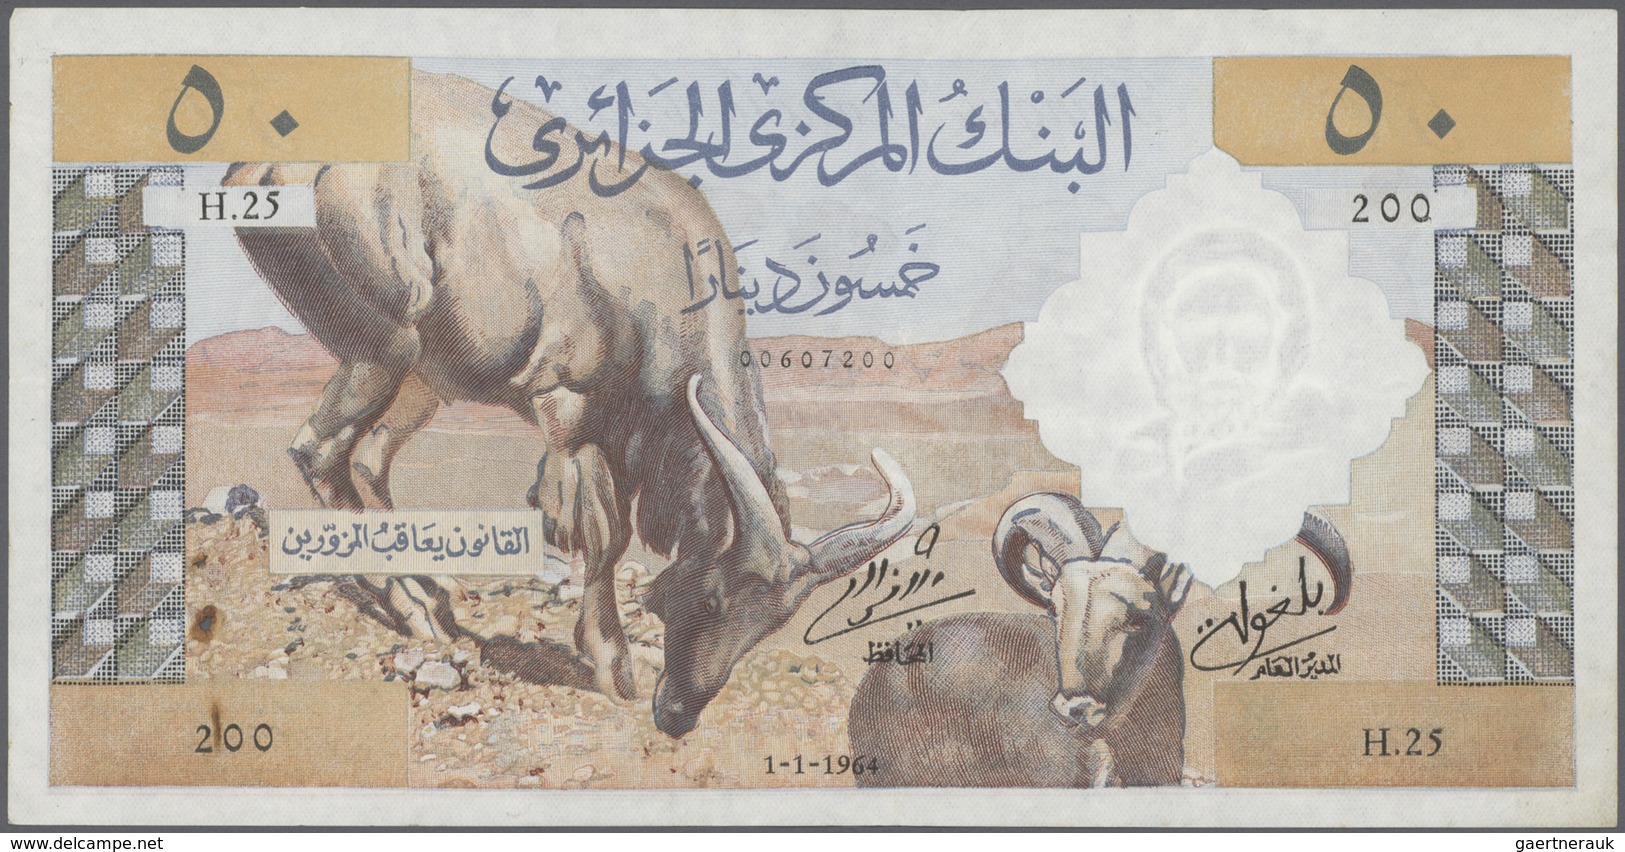 Algeria / Algerien: Set Of 2 Notes 50 Dinars 1964 P. 124, Both In Lightly Used Condition, Not Washed - Algerien